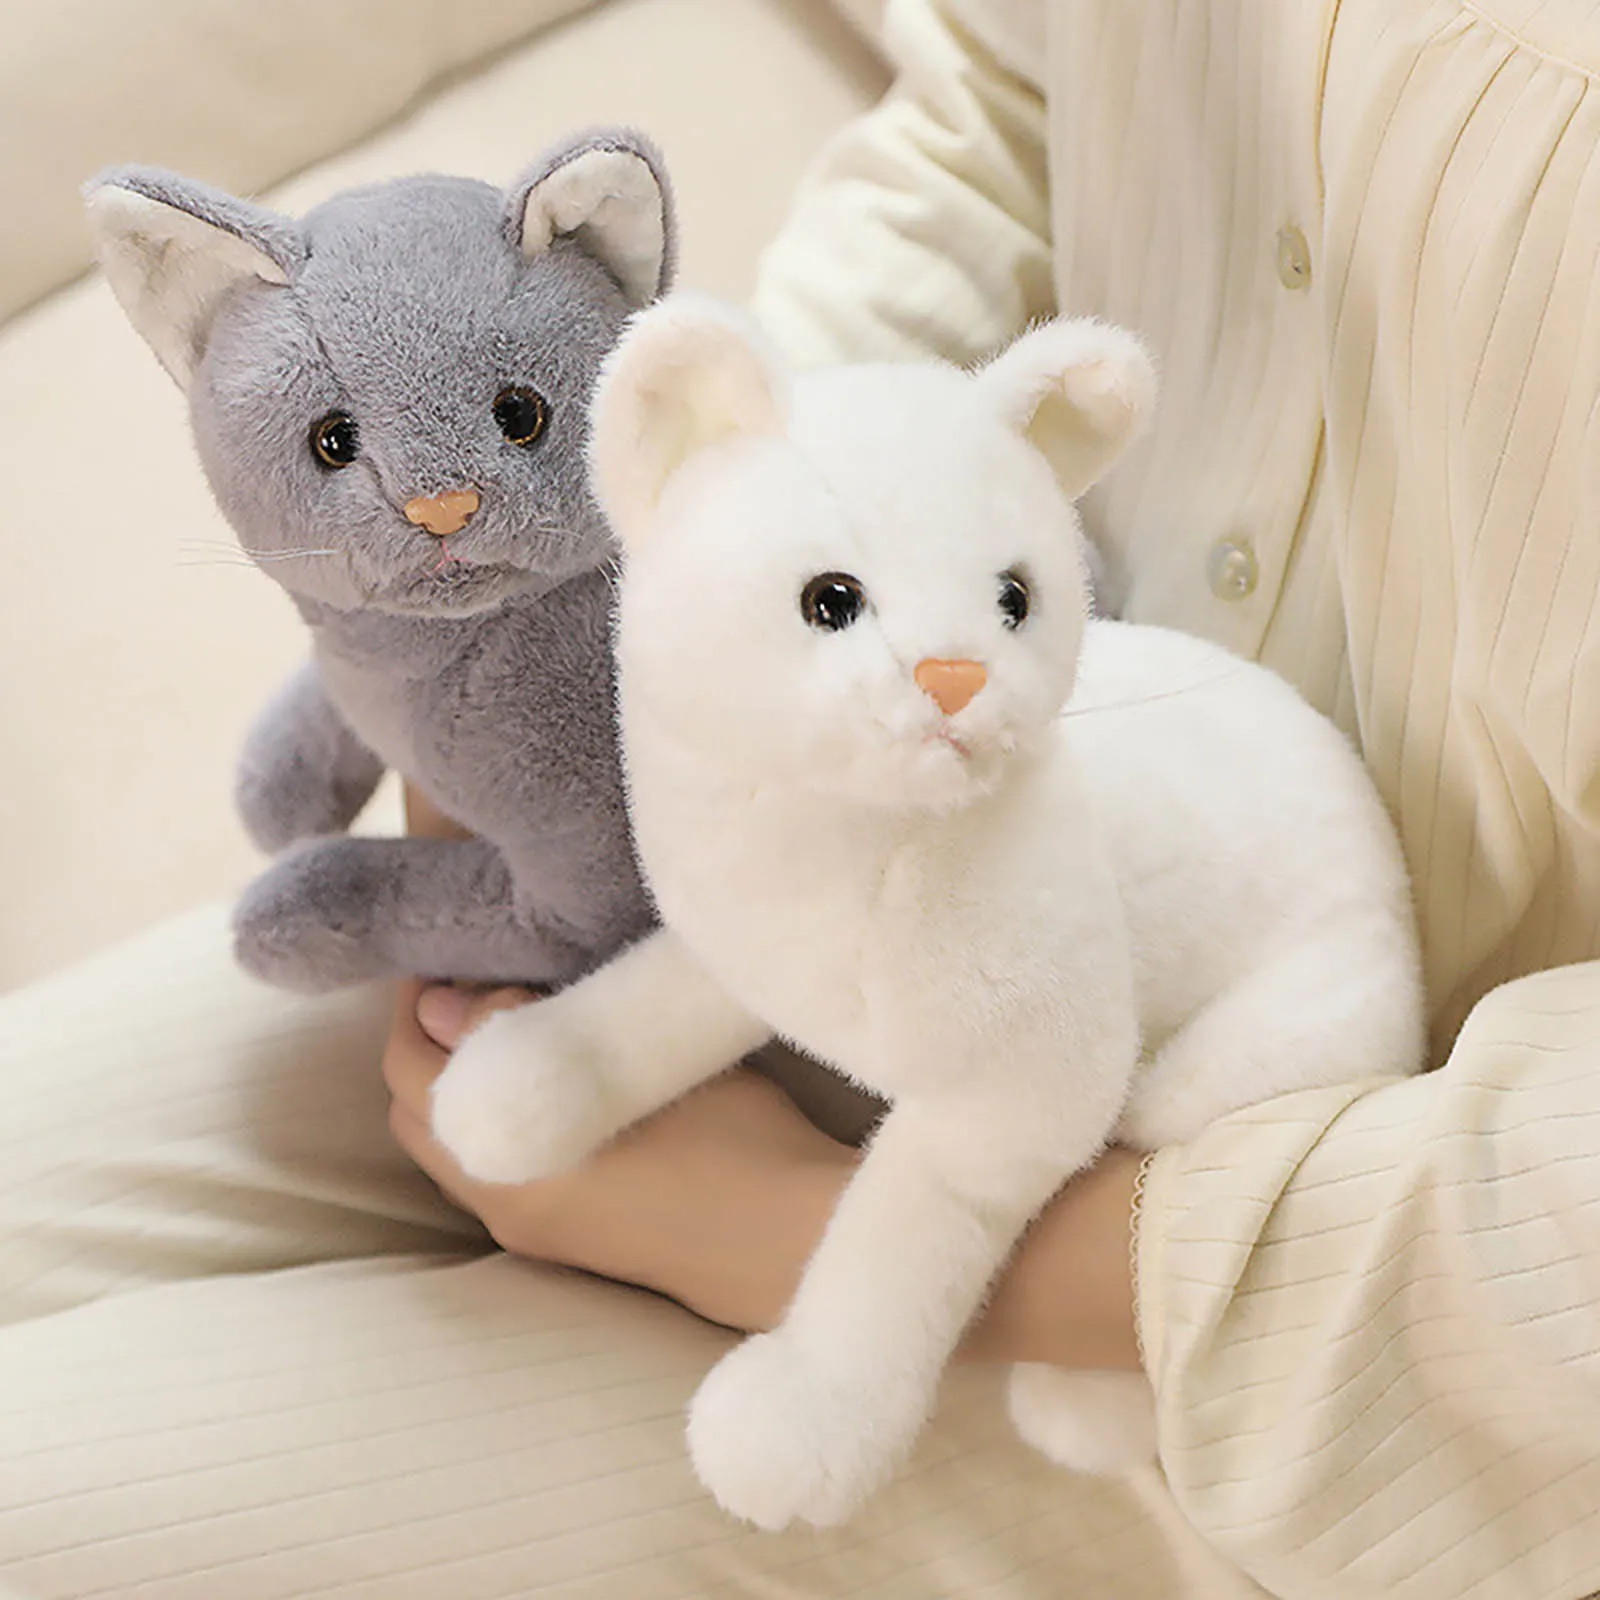 

Stuffed Lifelike Siamese Cats Plush Toy Simulation American Shorthair Cute Cat Doll Pet Toys Home Decor Gift For Girls Birthday